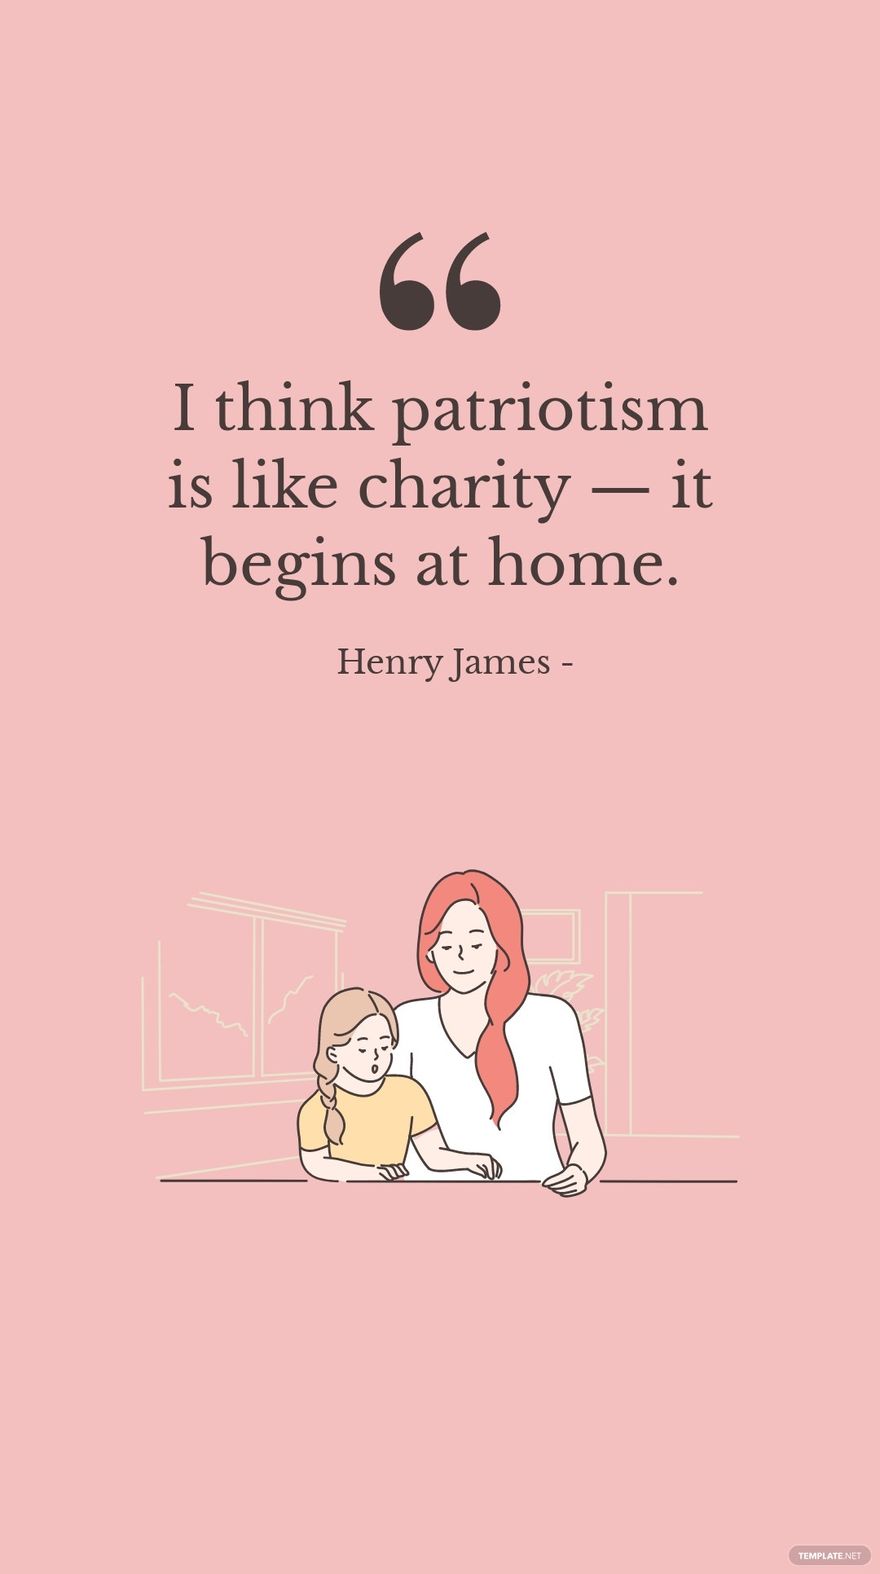 Free Henry James - I think patriotism is like charity — it begins at home.